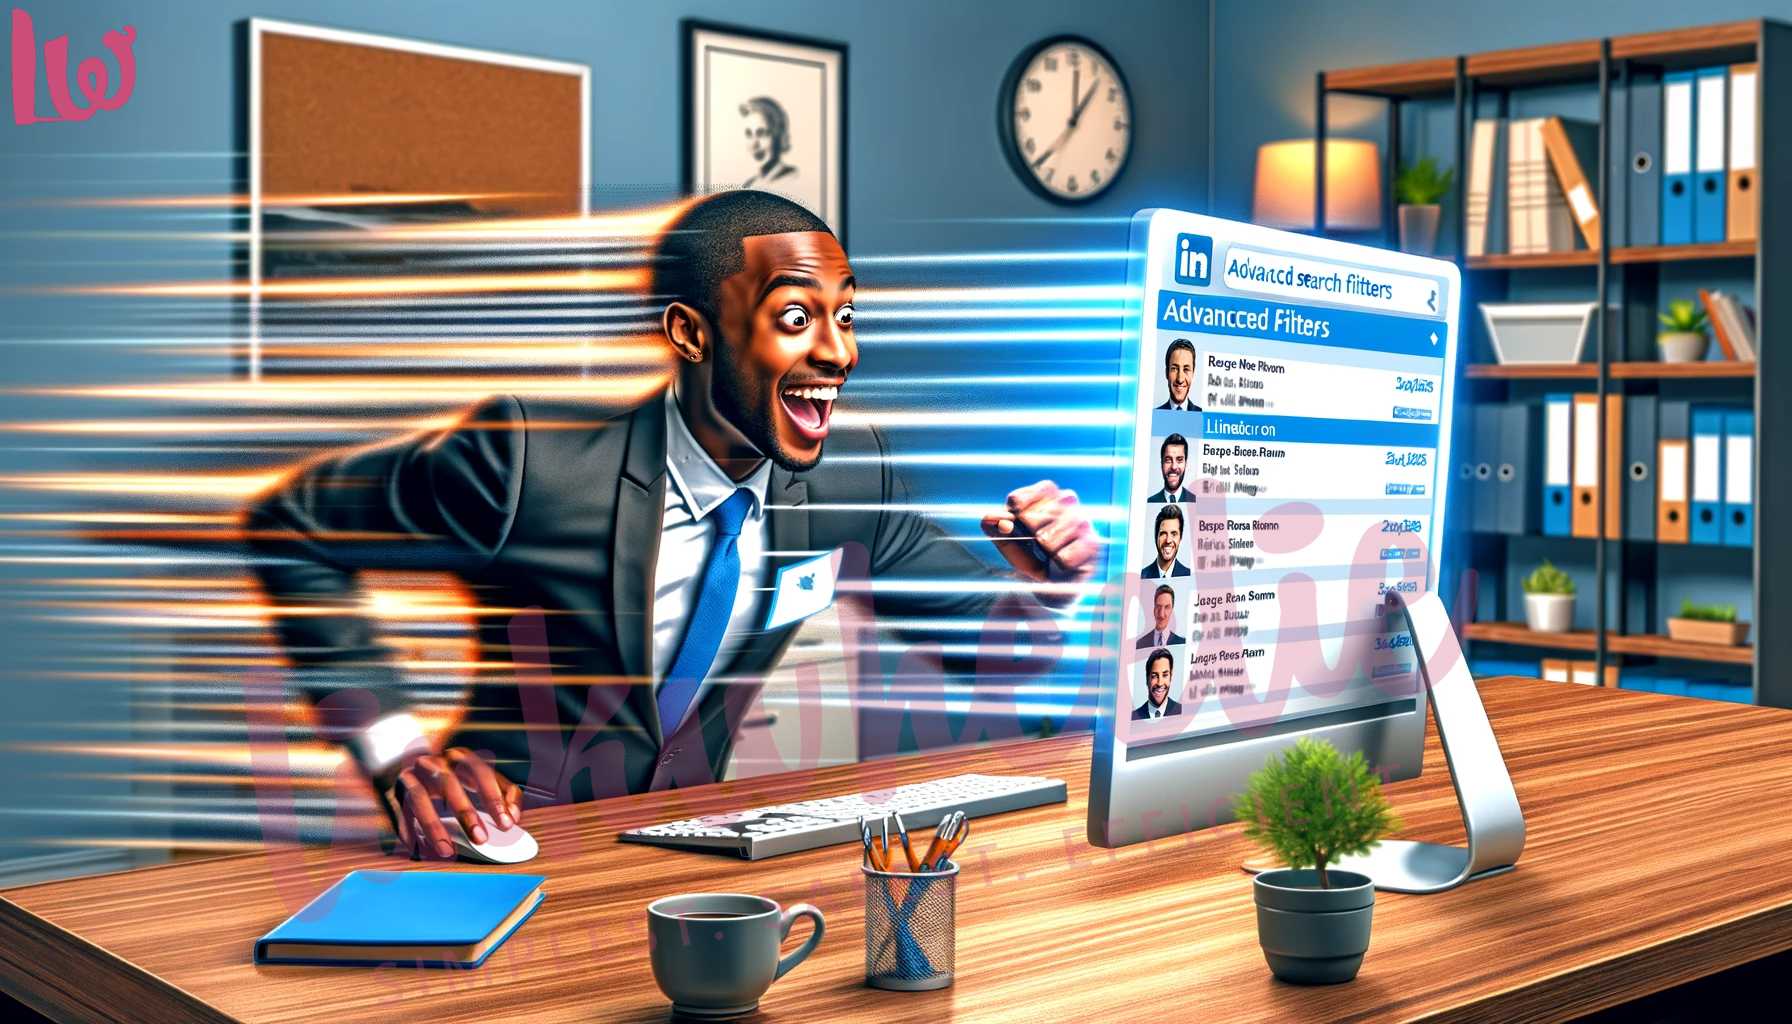  lively office scene depicting a young Black male professional rapidly scrolling through LinkedIn profiles on a computer screen, symbolizing the use of LinkedIn advance search filters